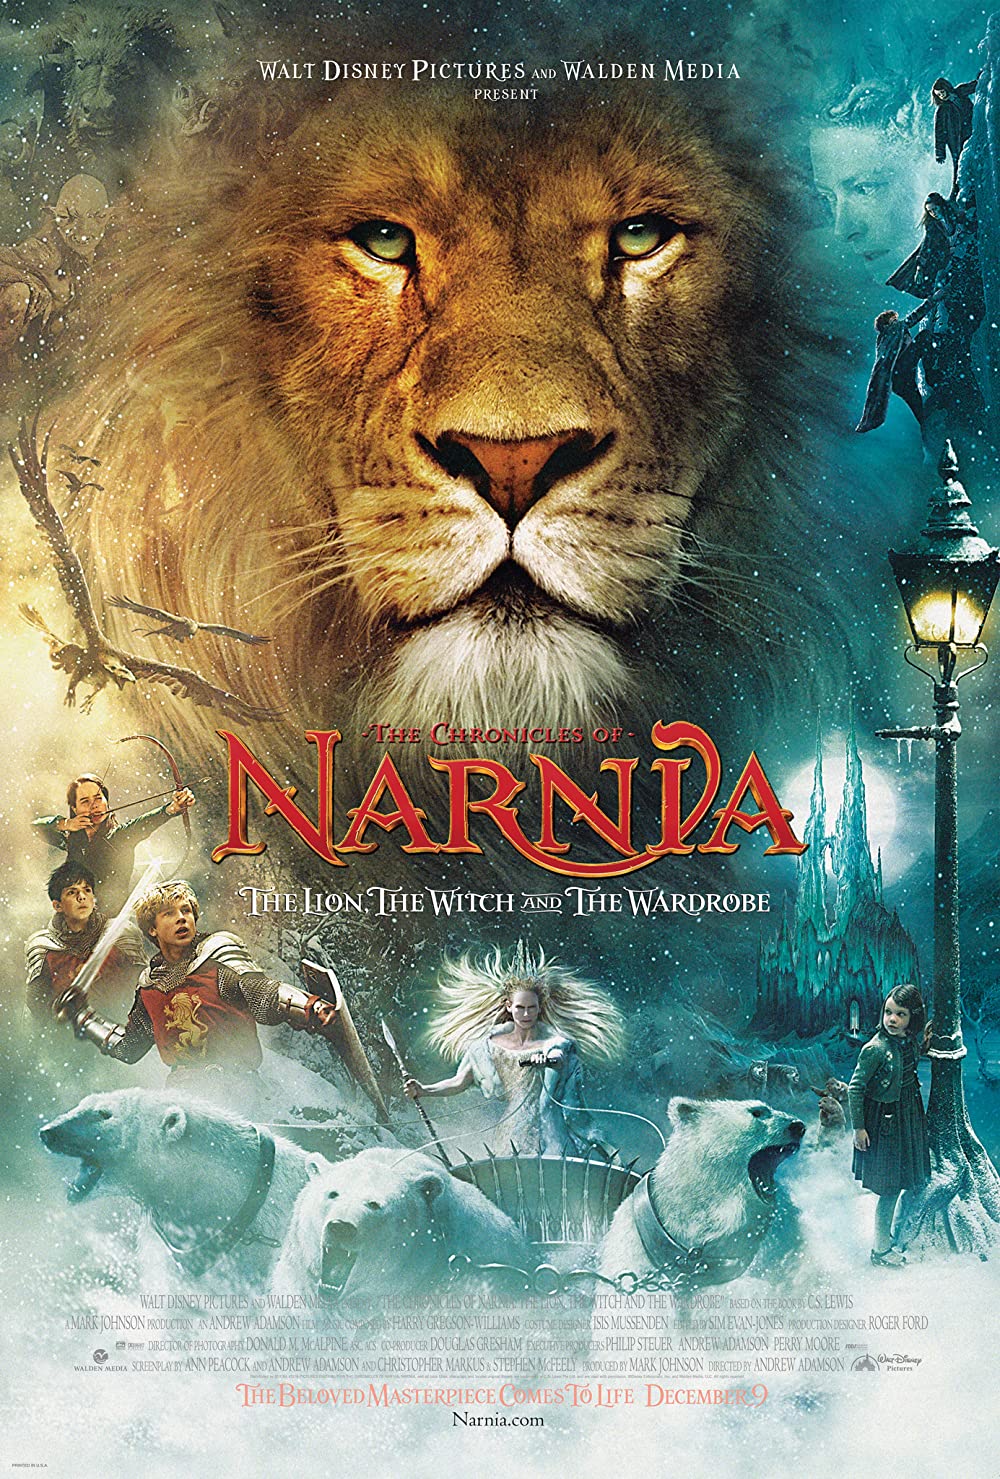 Chronicles of Narnia: the Lion, the Witch, and the Wardrobe book cover